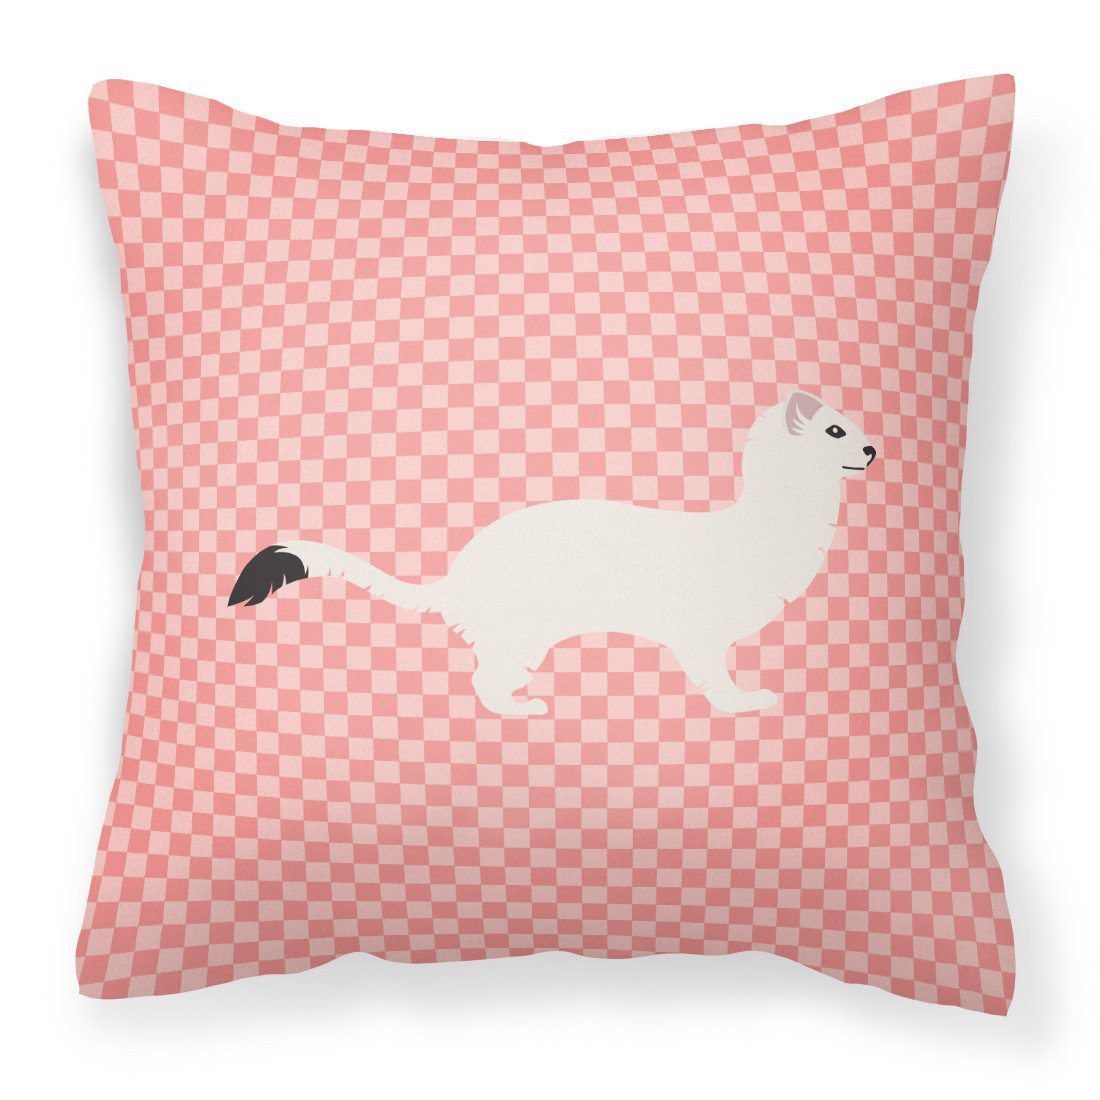 Stoat Short-tailed Weasel Pink Check Fabric Decorative Pillow BB7872PW1818 by Caroline's Treasures